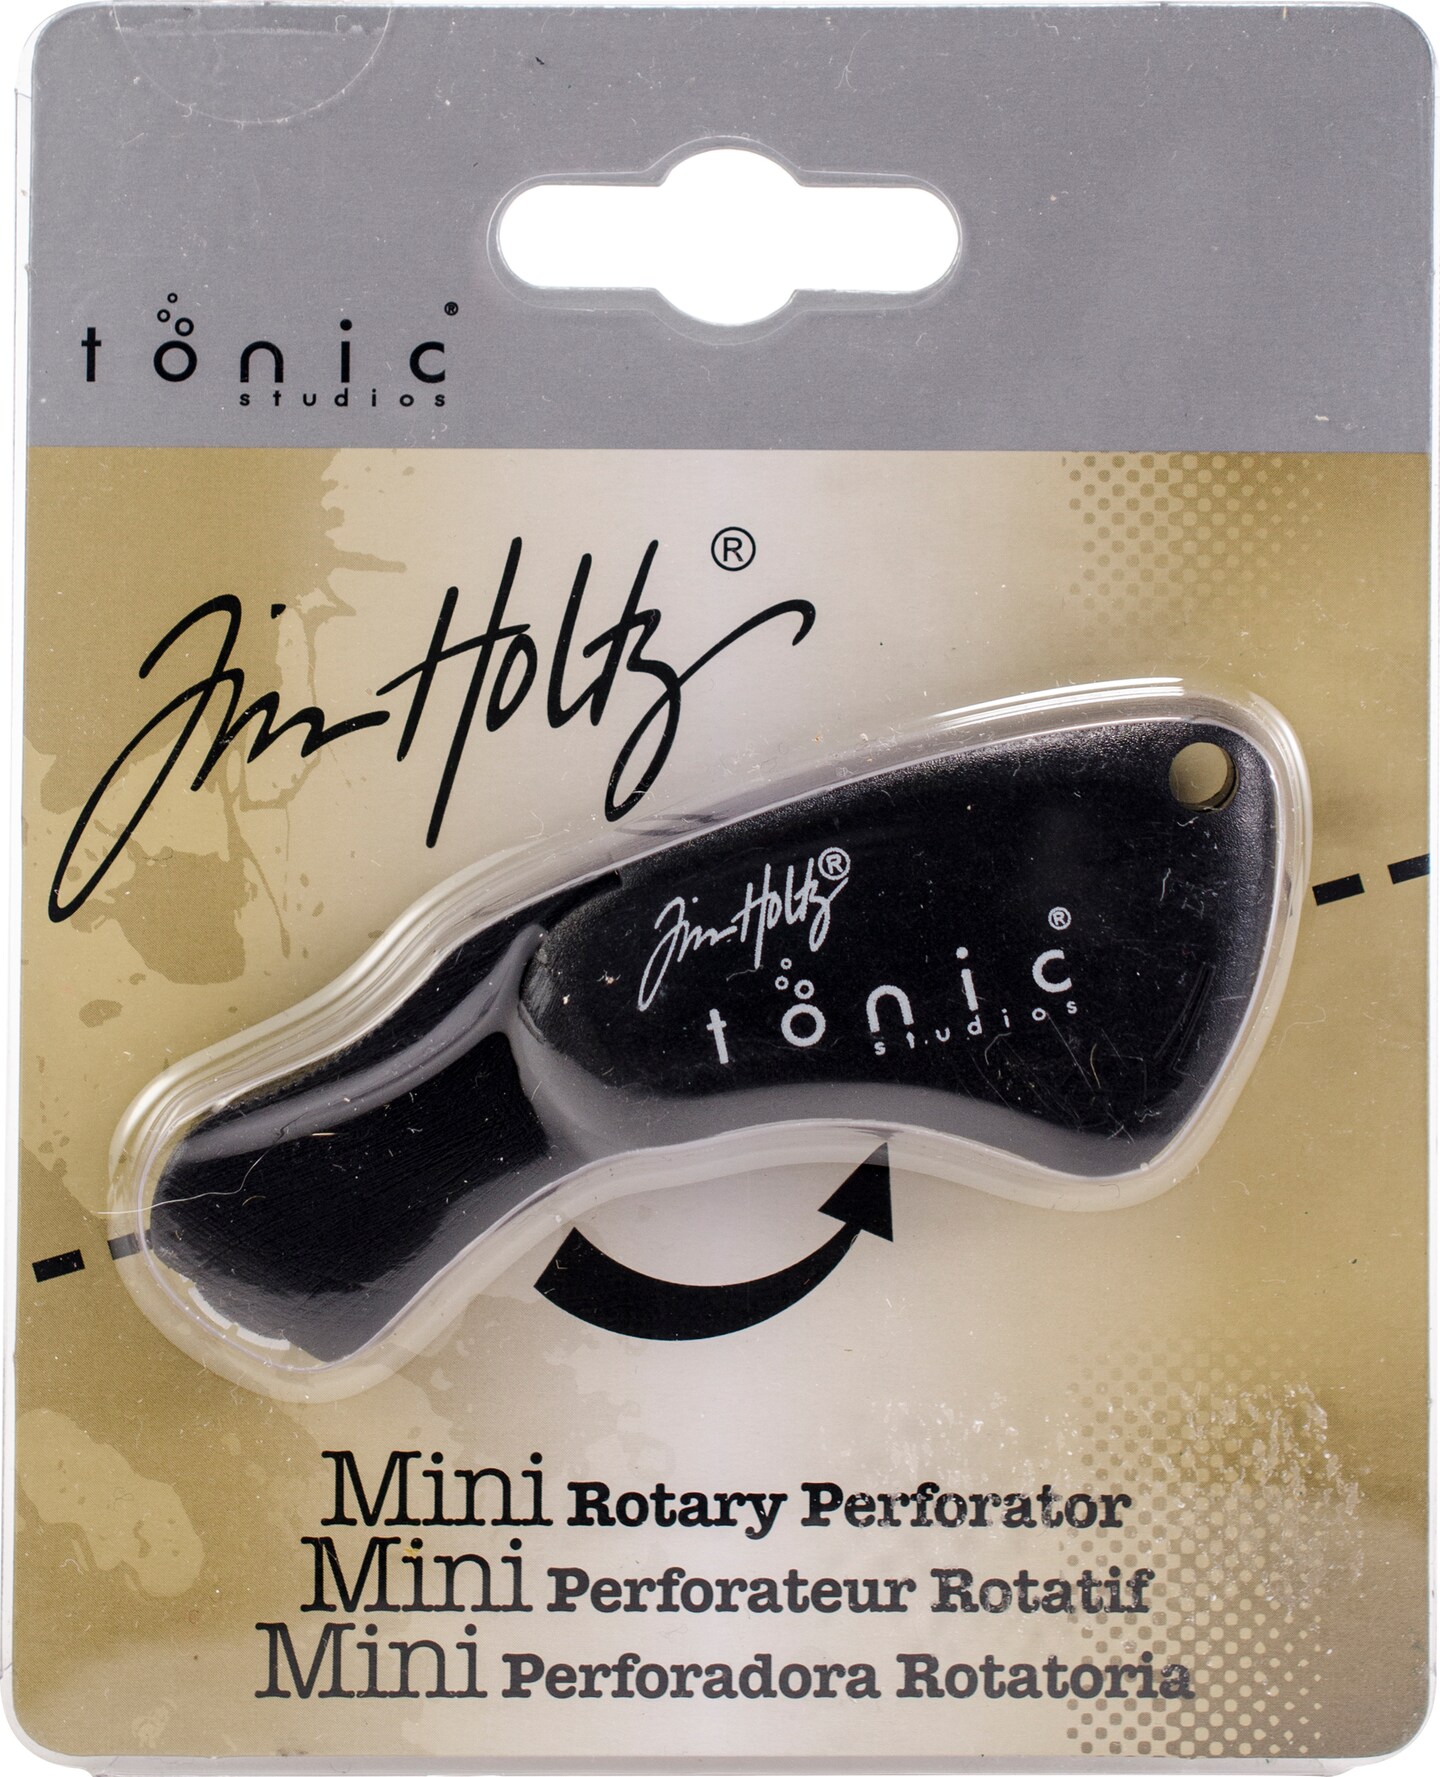  tonic studios Mini Rotary Perforator - 18mm Pinking Blade for  Cutting Perforated Paper - Rolling Craft Tool for Cardstock and Scrapbooks  - Small & Foldable, Black, 5 x 4 x 0.5